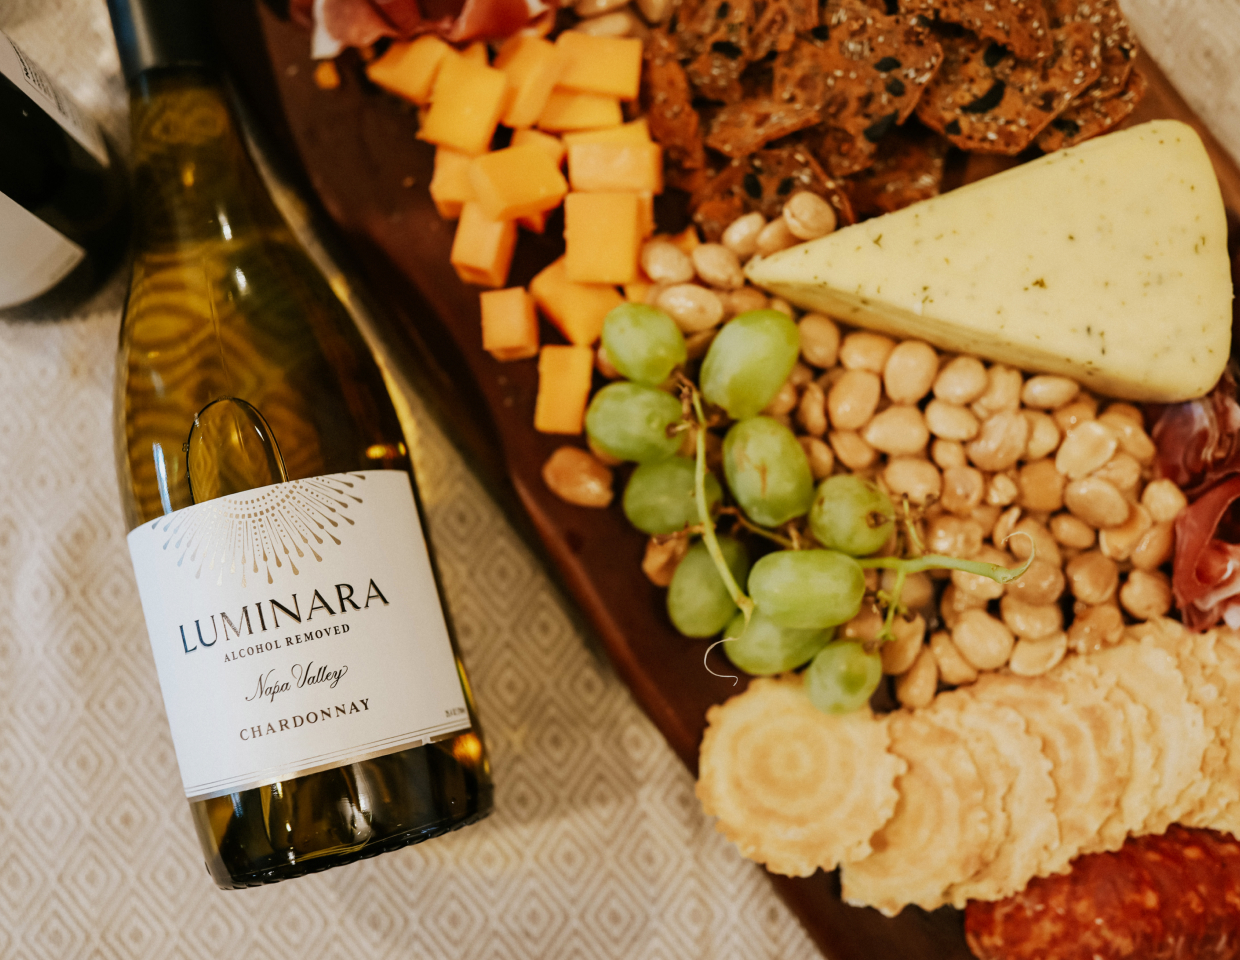 Bottle of Luminara Chardonnay laying down next to a cheese, crackers, nuts, and grapes spread on a wood cutting board.